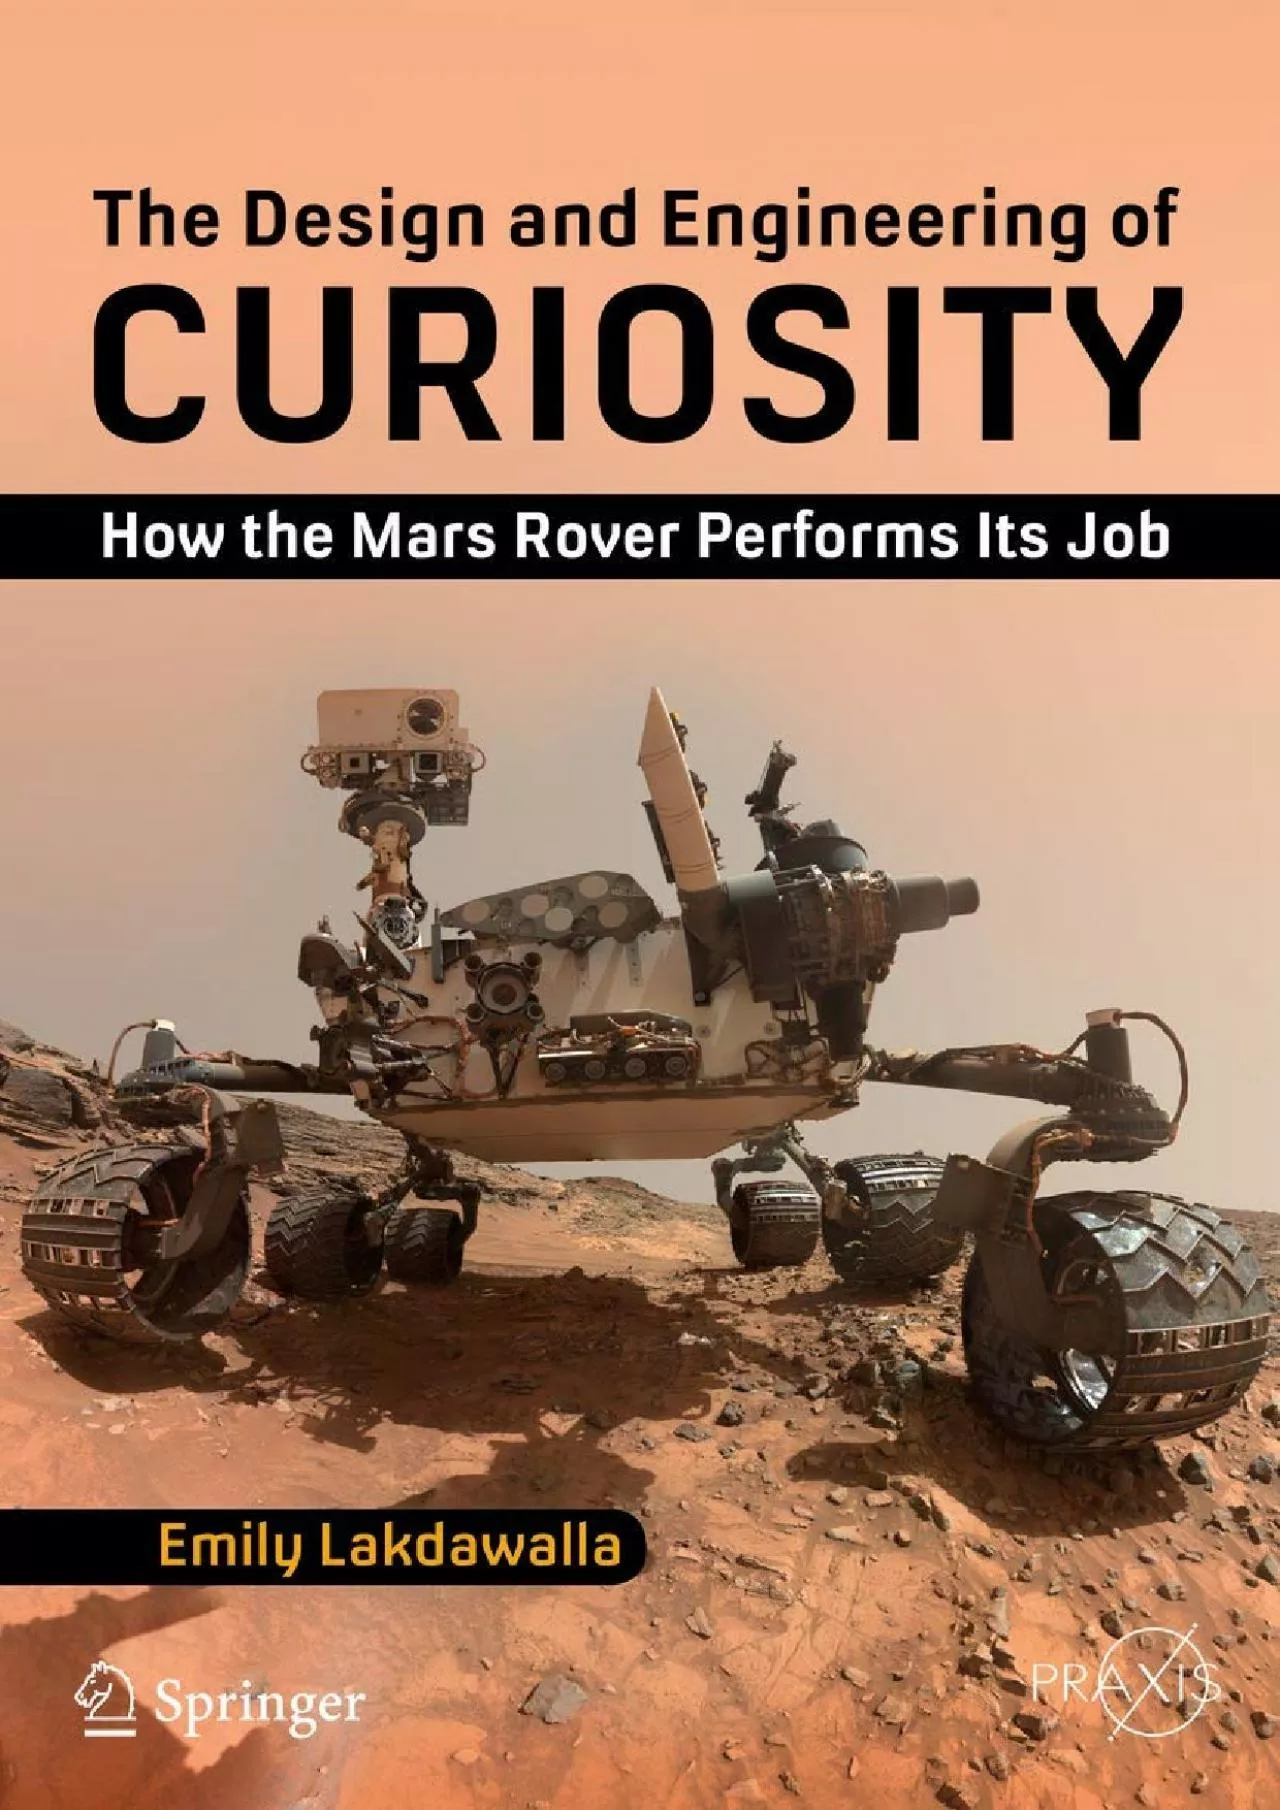 (EBOOK)-The Design and Engineering of Curiosity: How the Mars Rover Performs Its Job (Springer